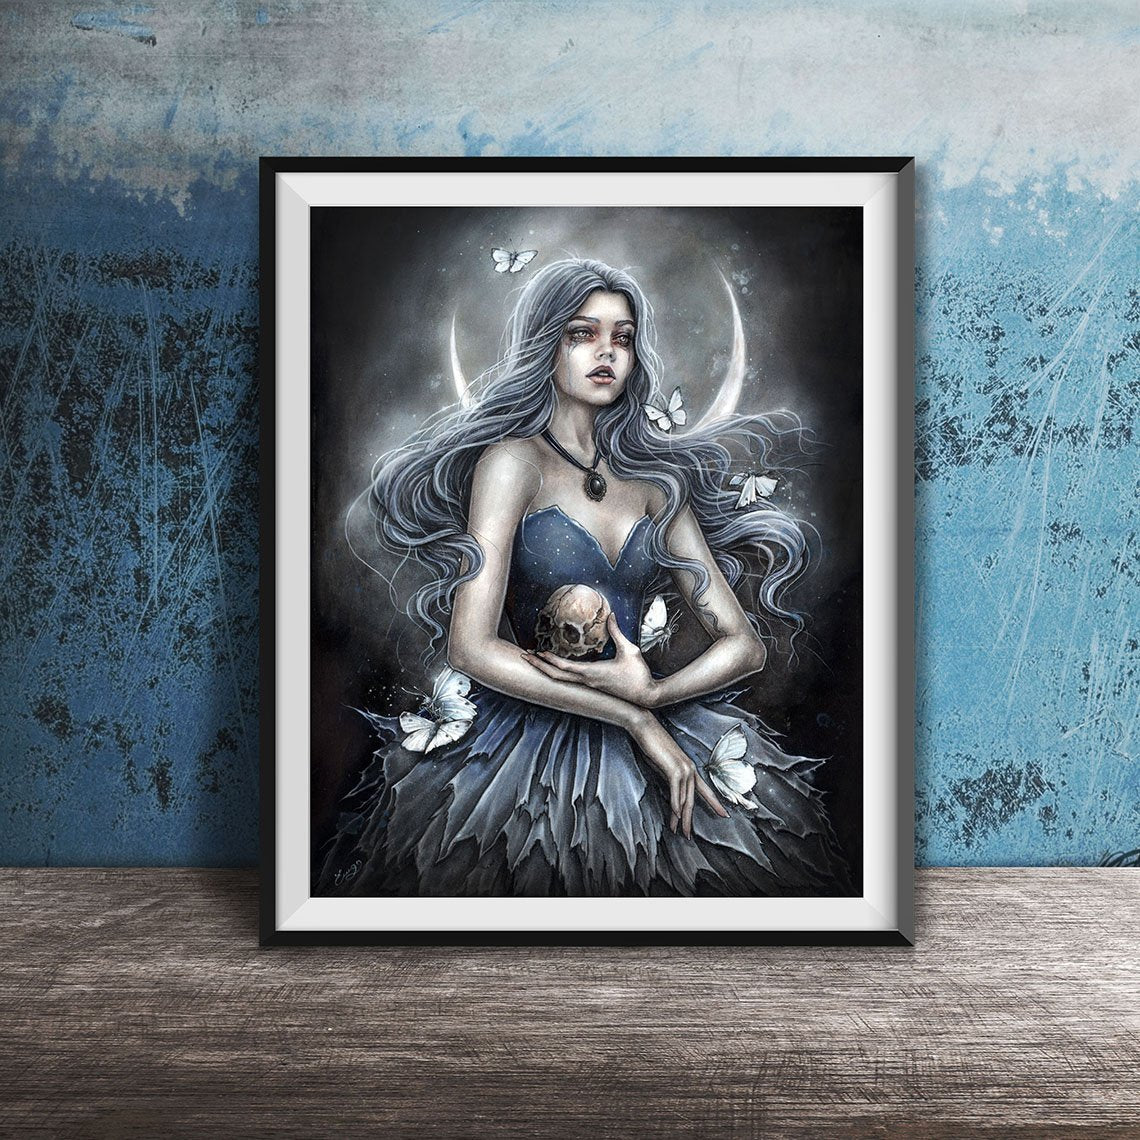 Blue Midnight by Enys Guerrero, Fine Art Print